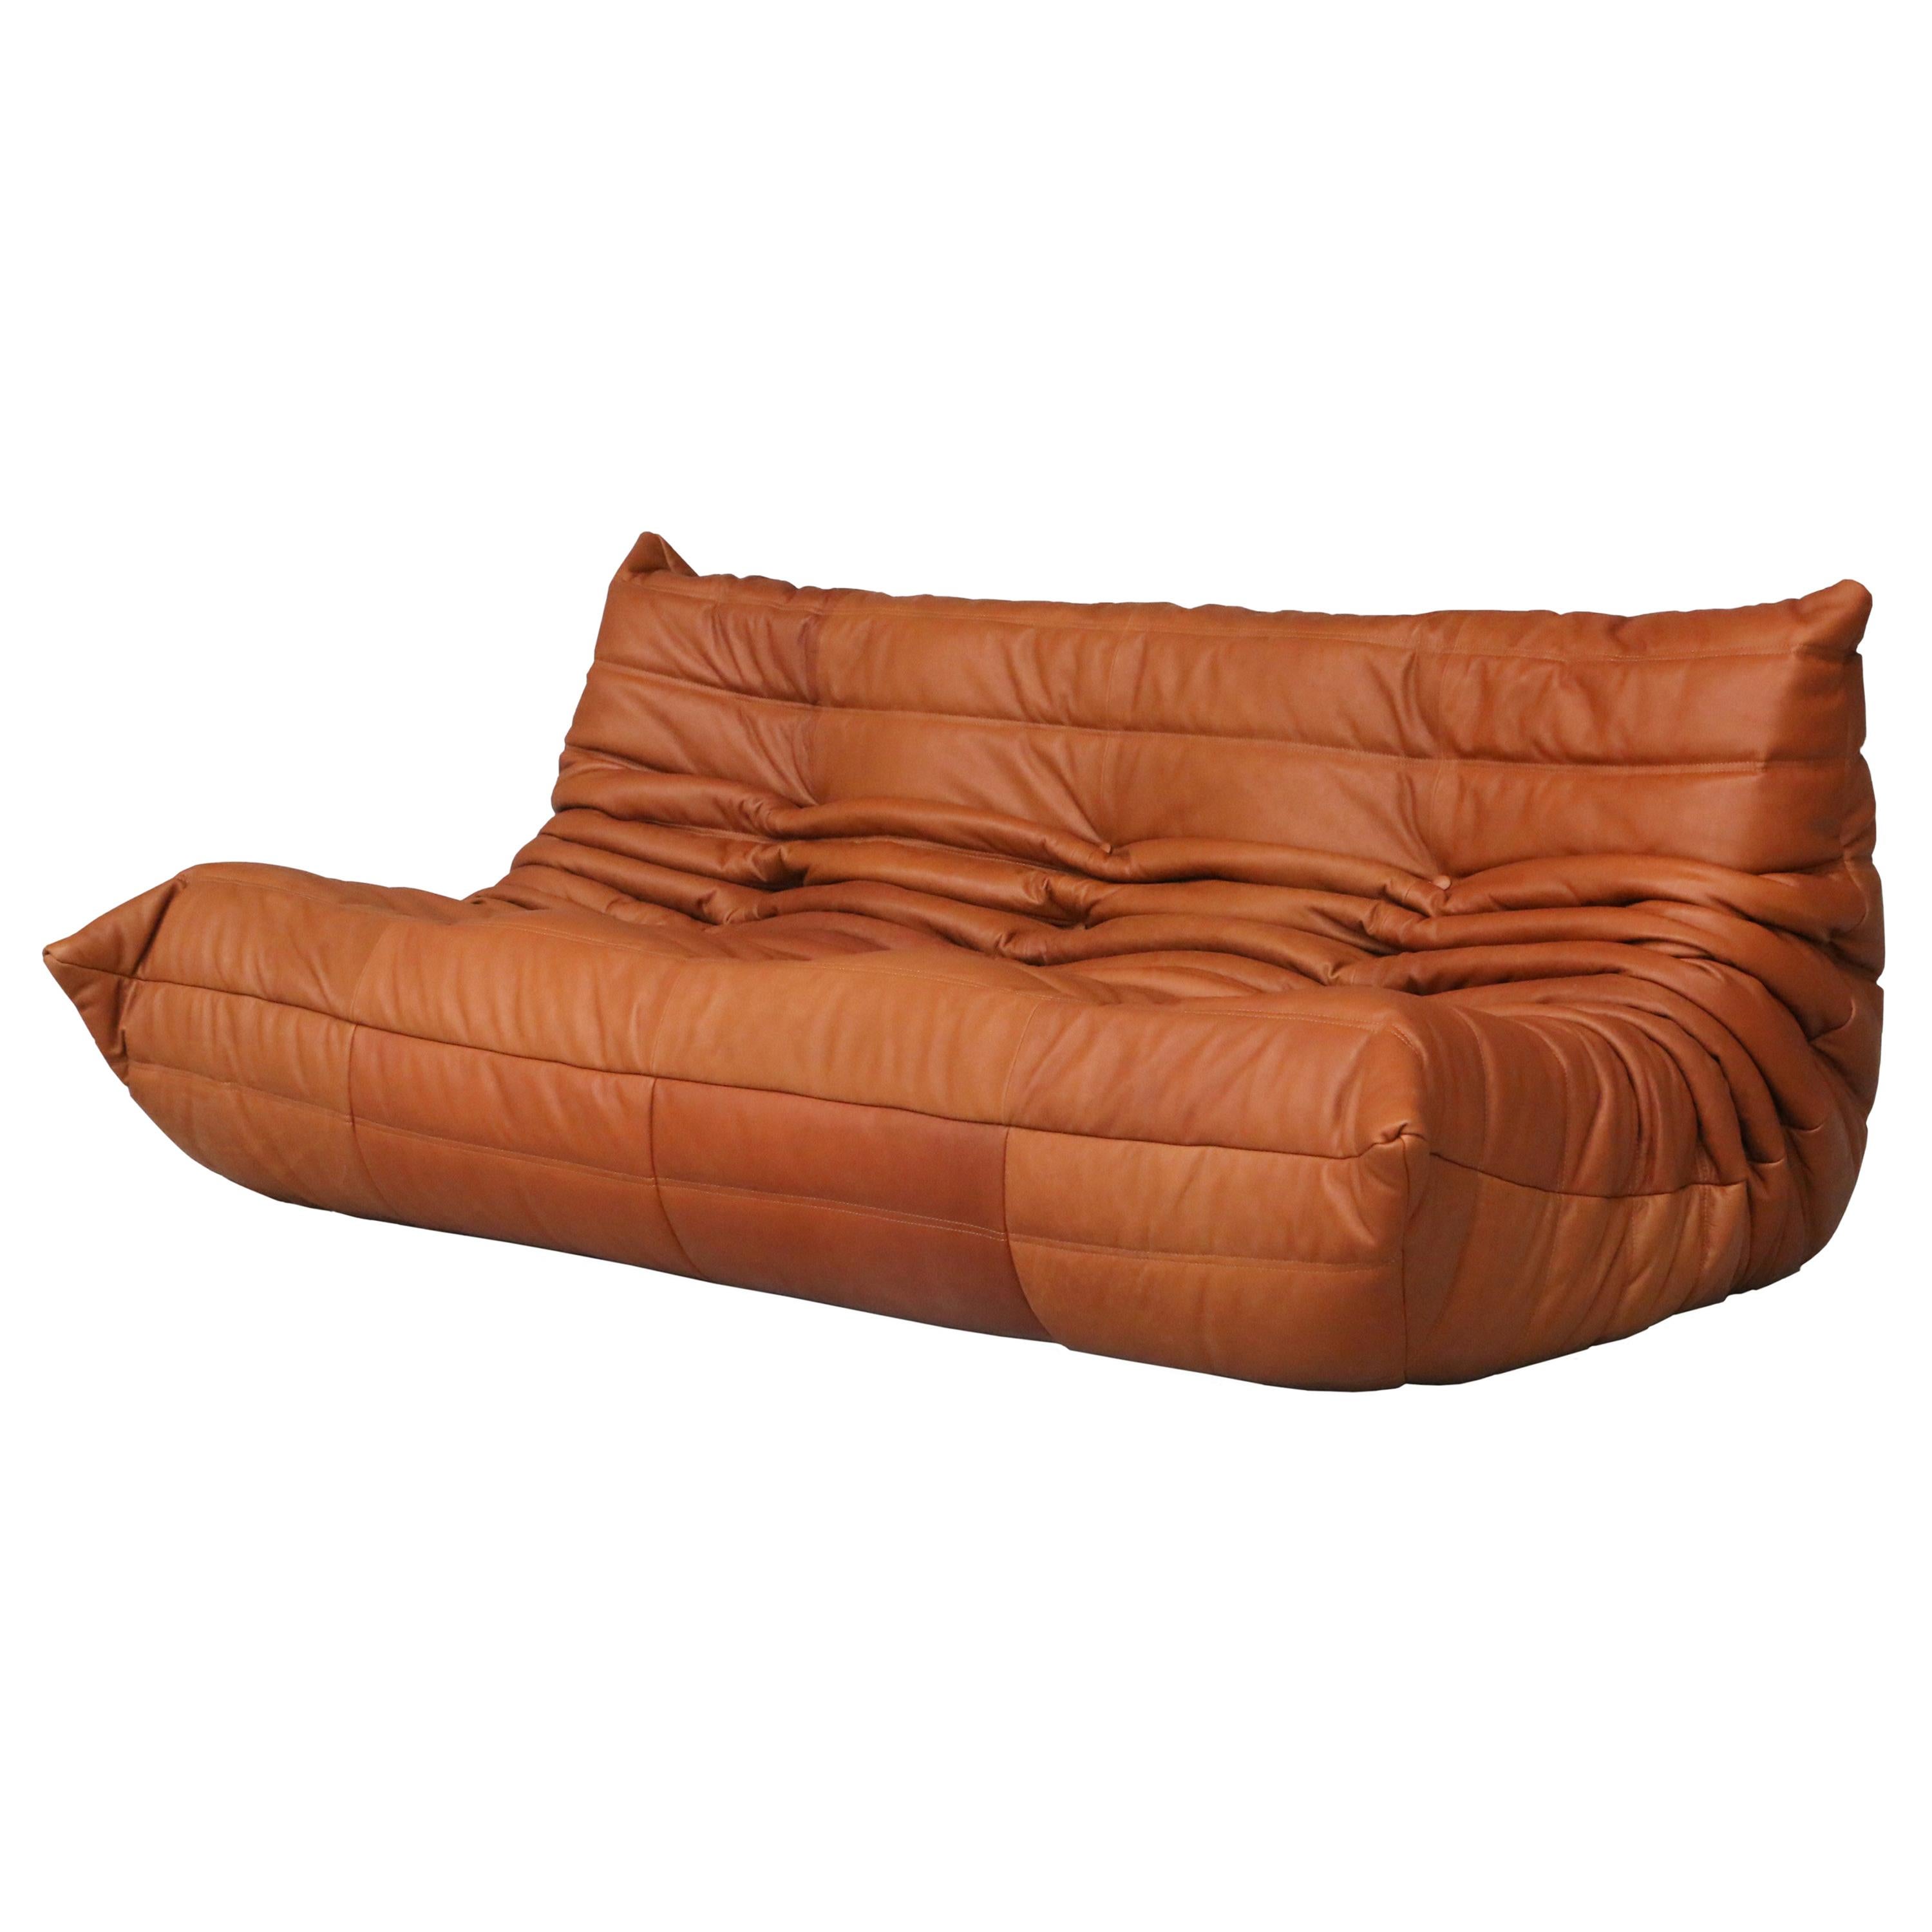 CERTIFIED Ligne Roset TOGO Large Setee in natural Cognac Leather DIAMOND QUALITY For Sale